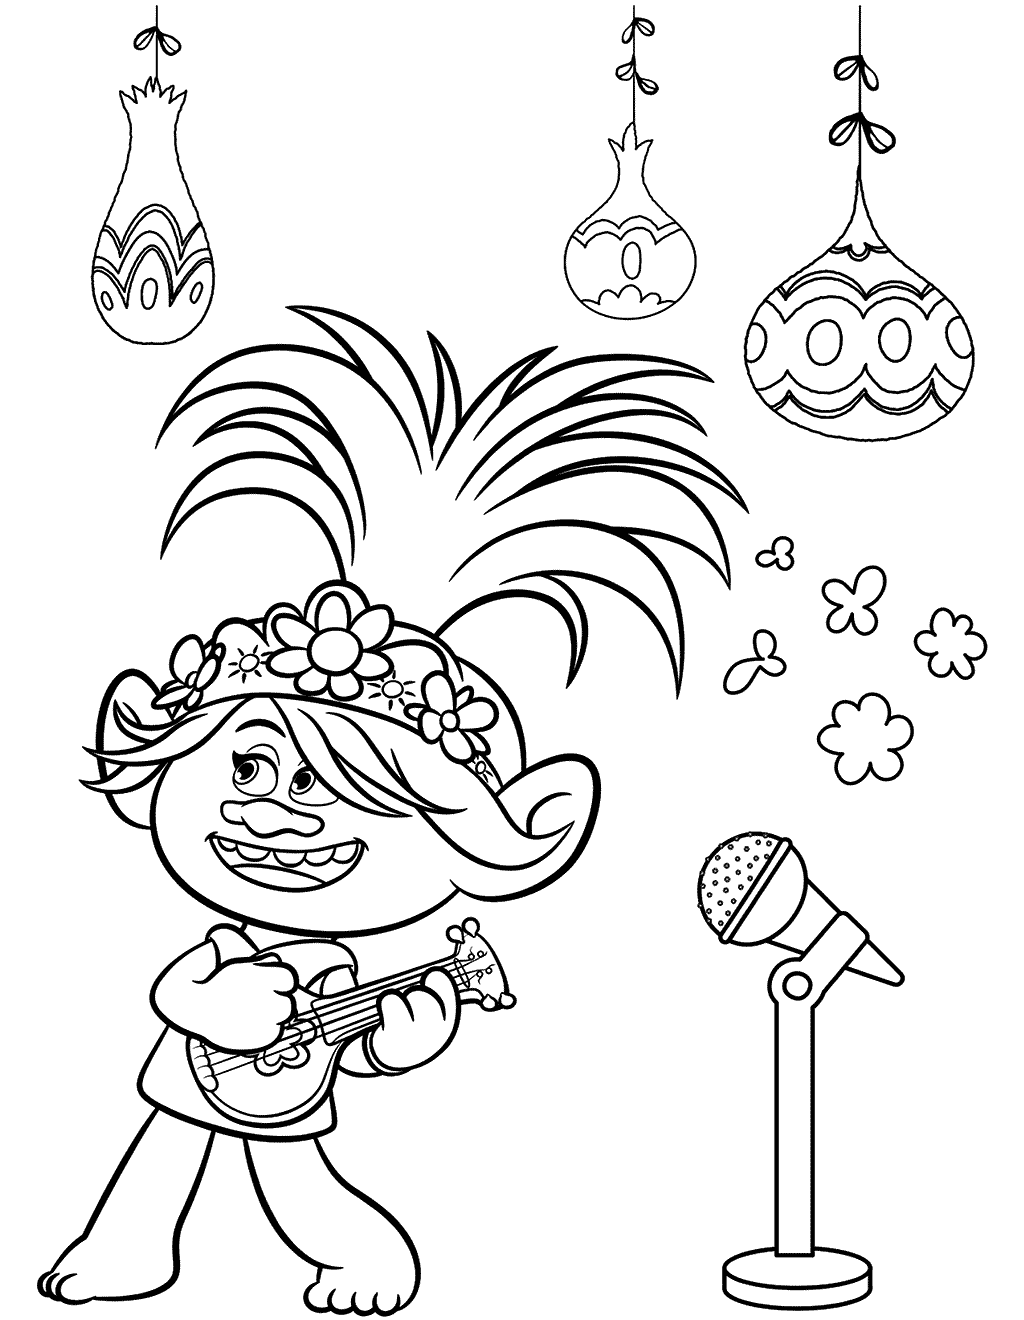 Queen Poppy Coloring Page